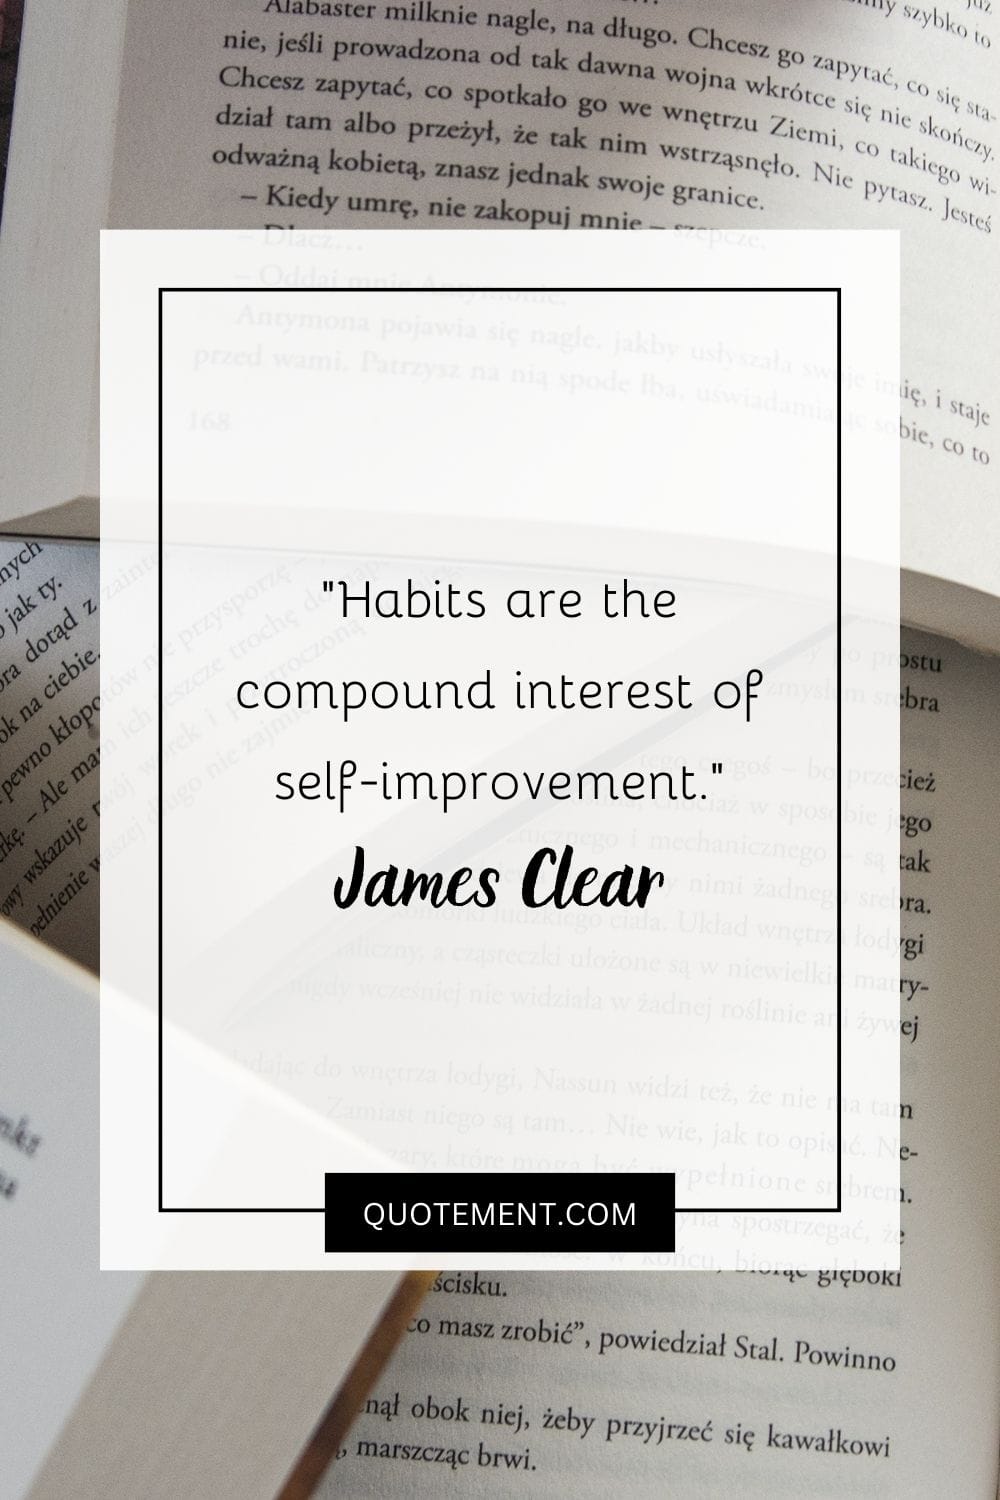 Habits are the compound interest of self-improvement.